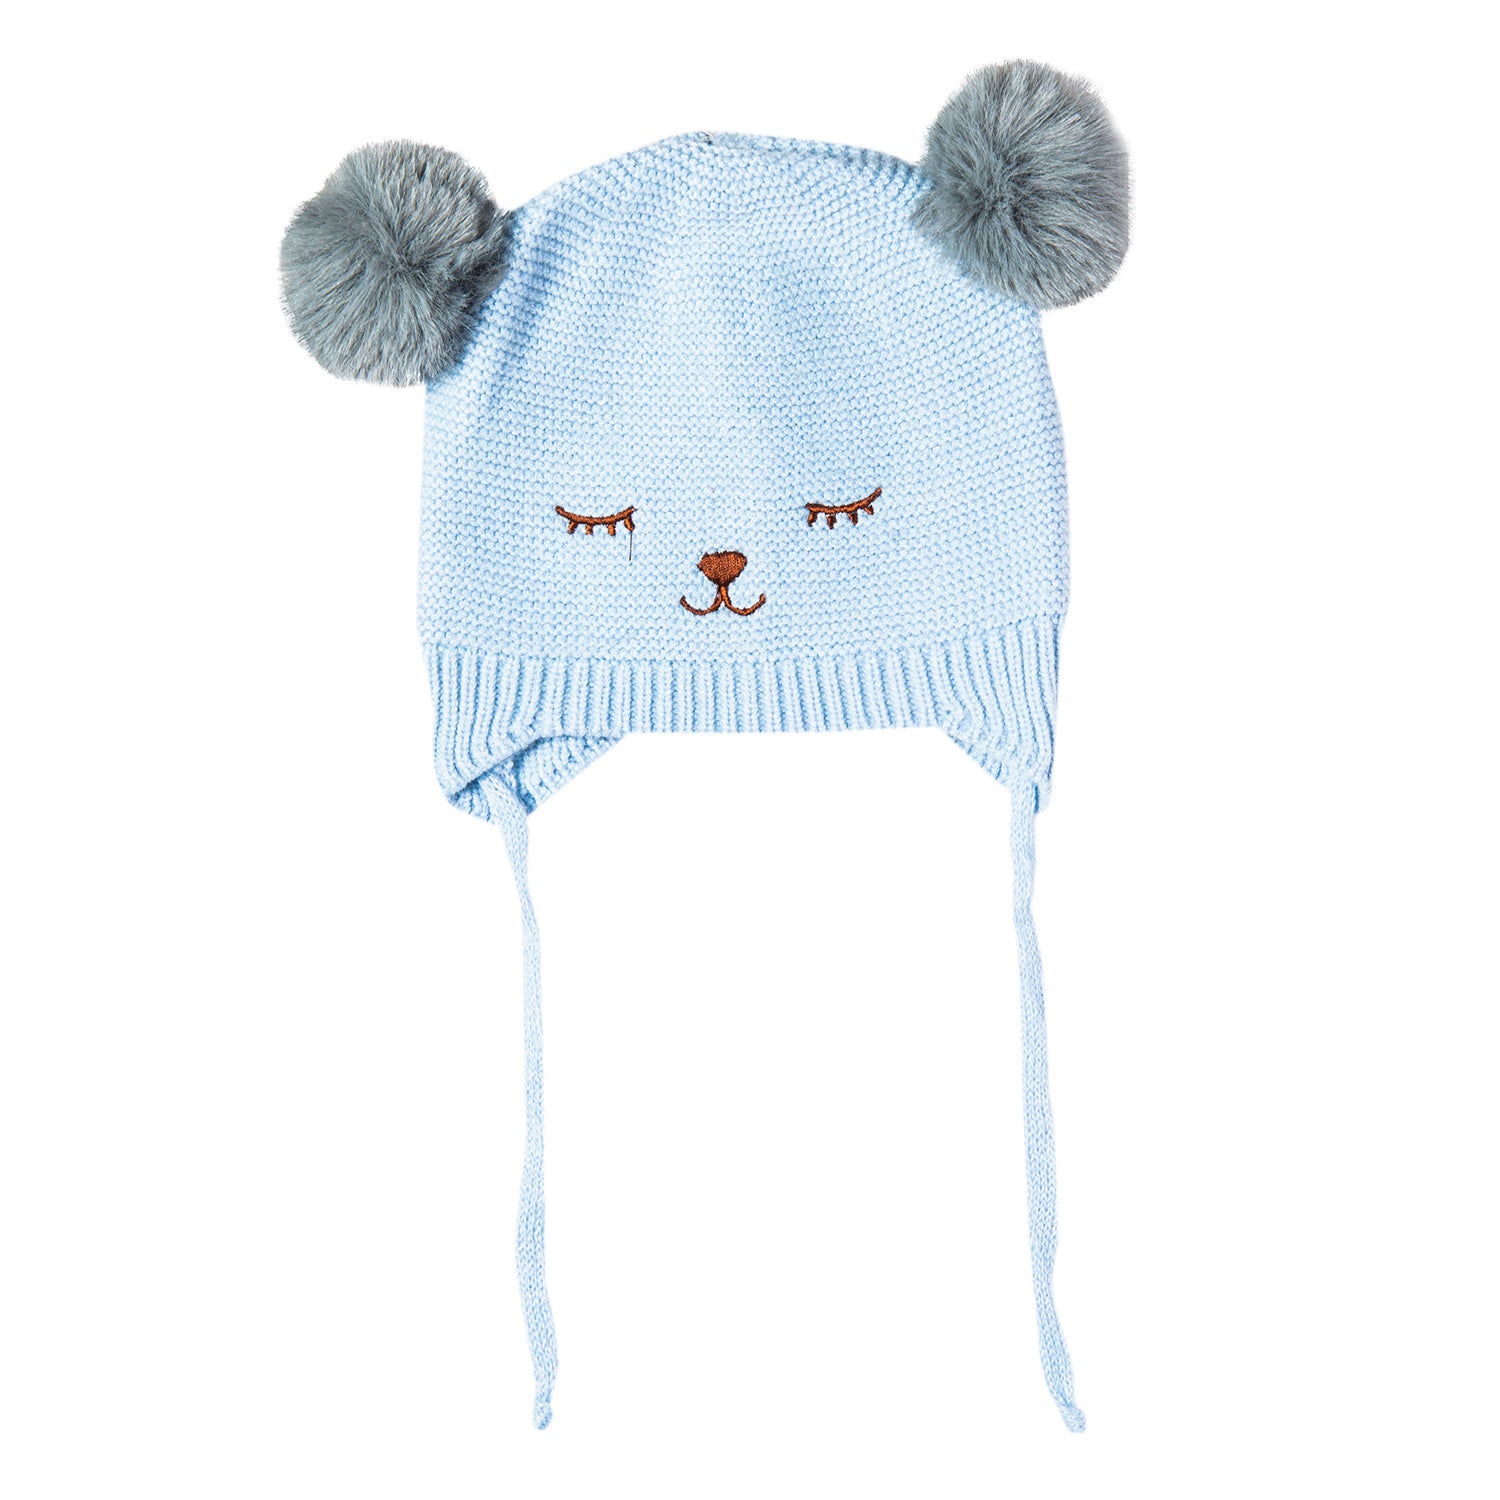 Baby Moo Knit Woollen Cap With Tie Knot For Ear Cover Sleeping Pom Pom Blue